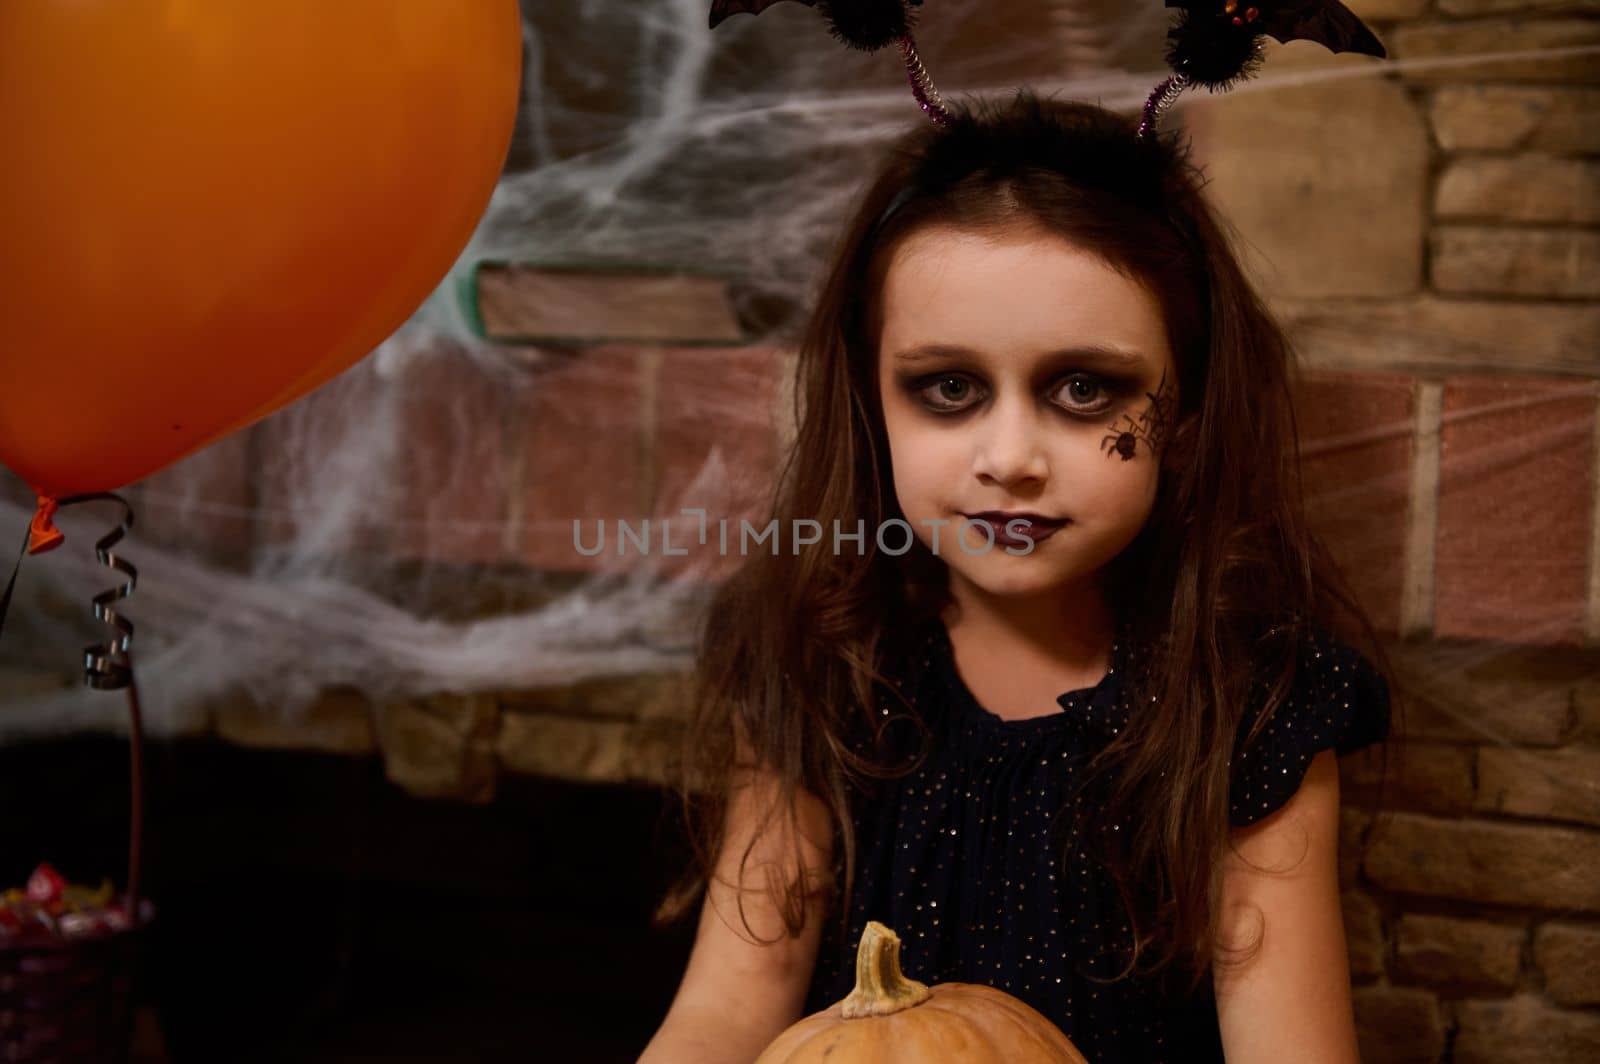 Little girl, looking like a sorceress in witch carnival costume enjoying Halloween preparations. Adorable enchantress by artgf